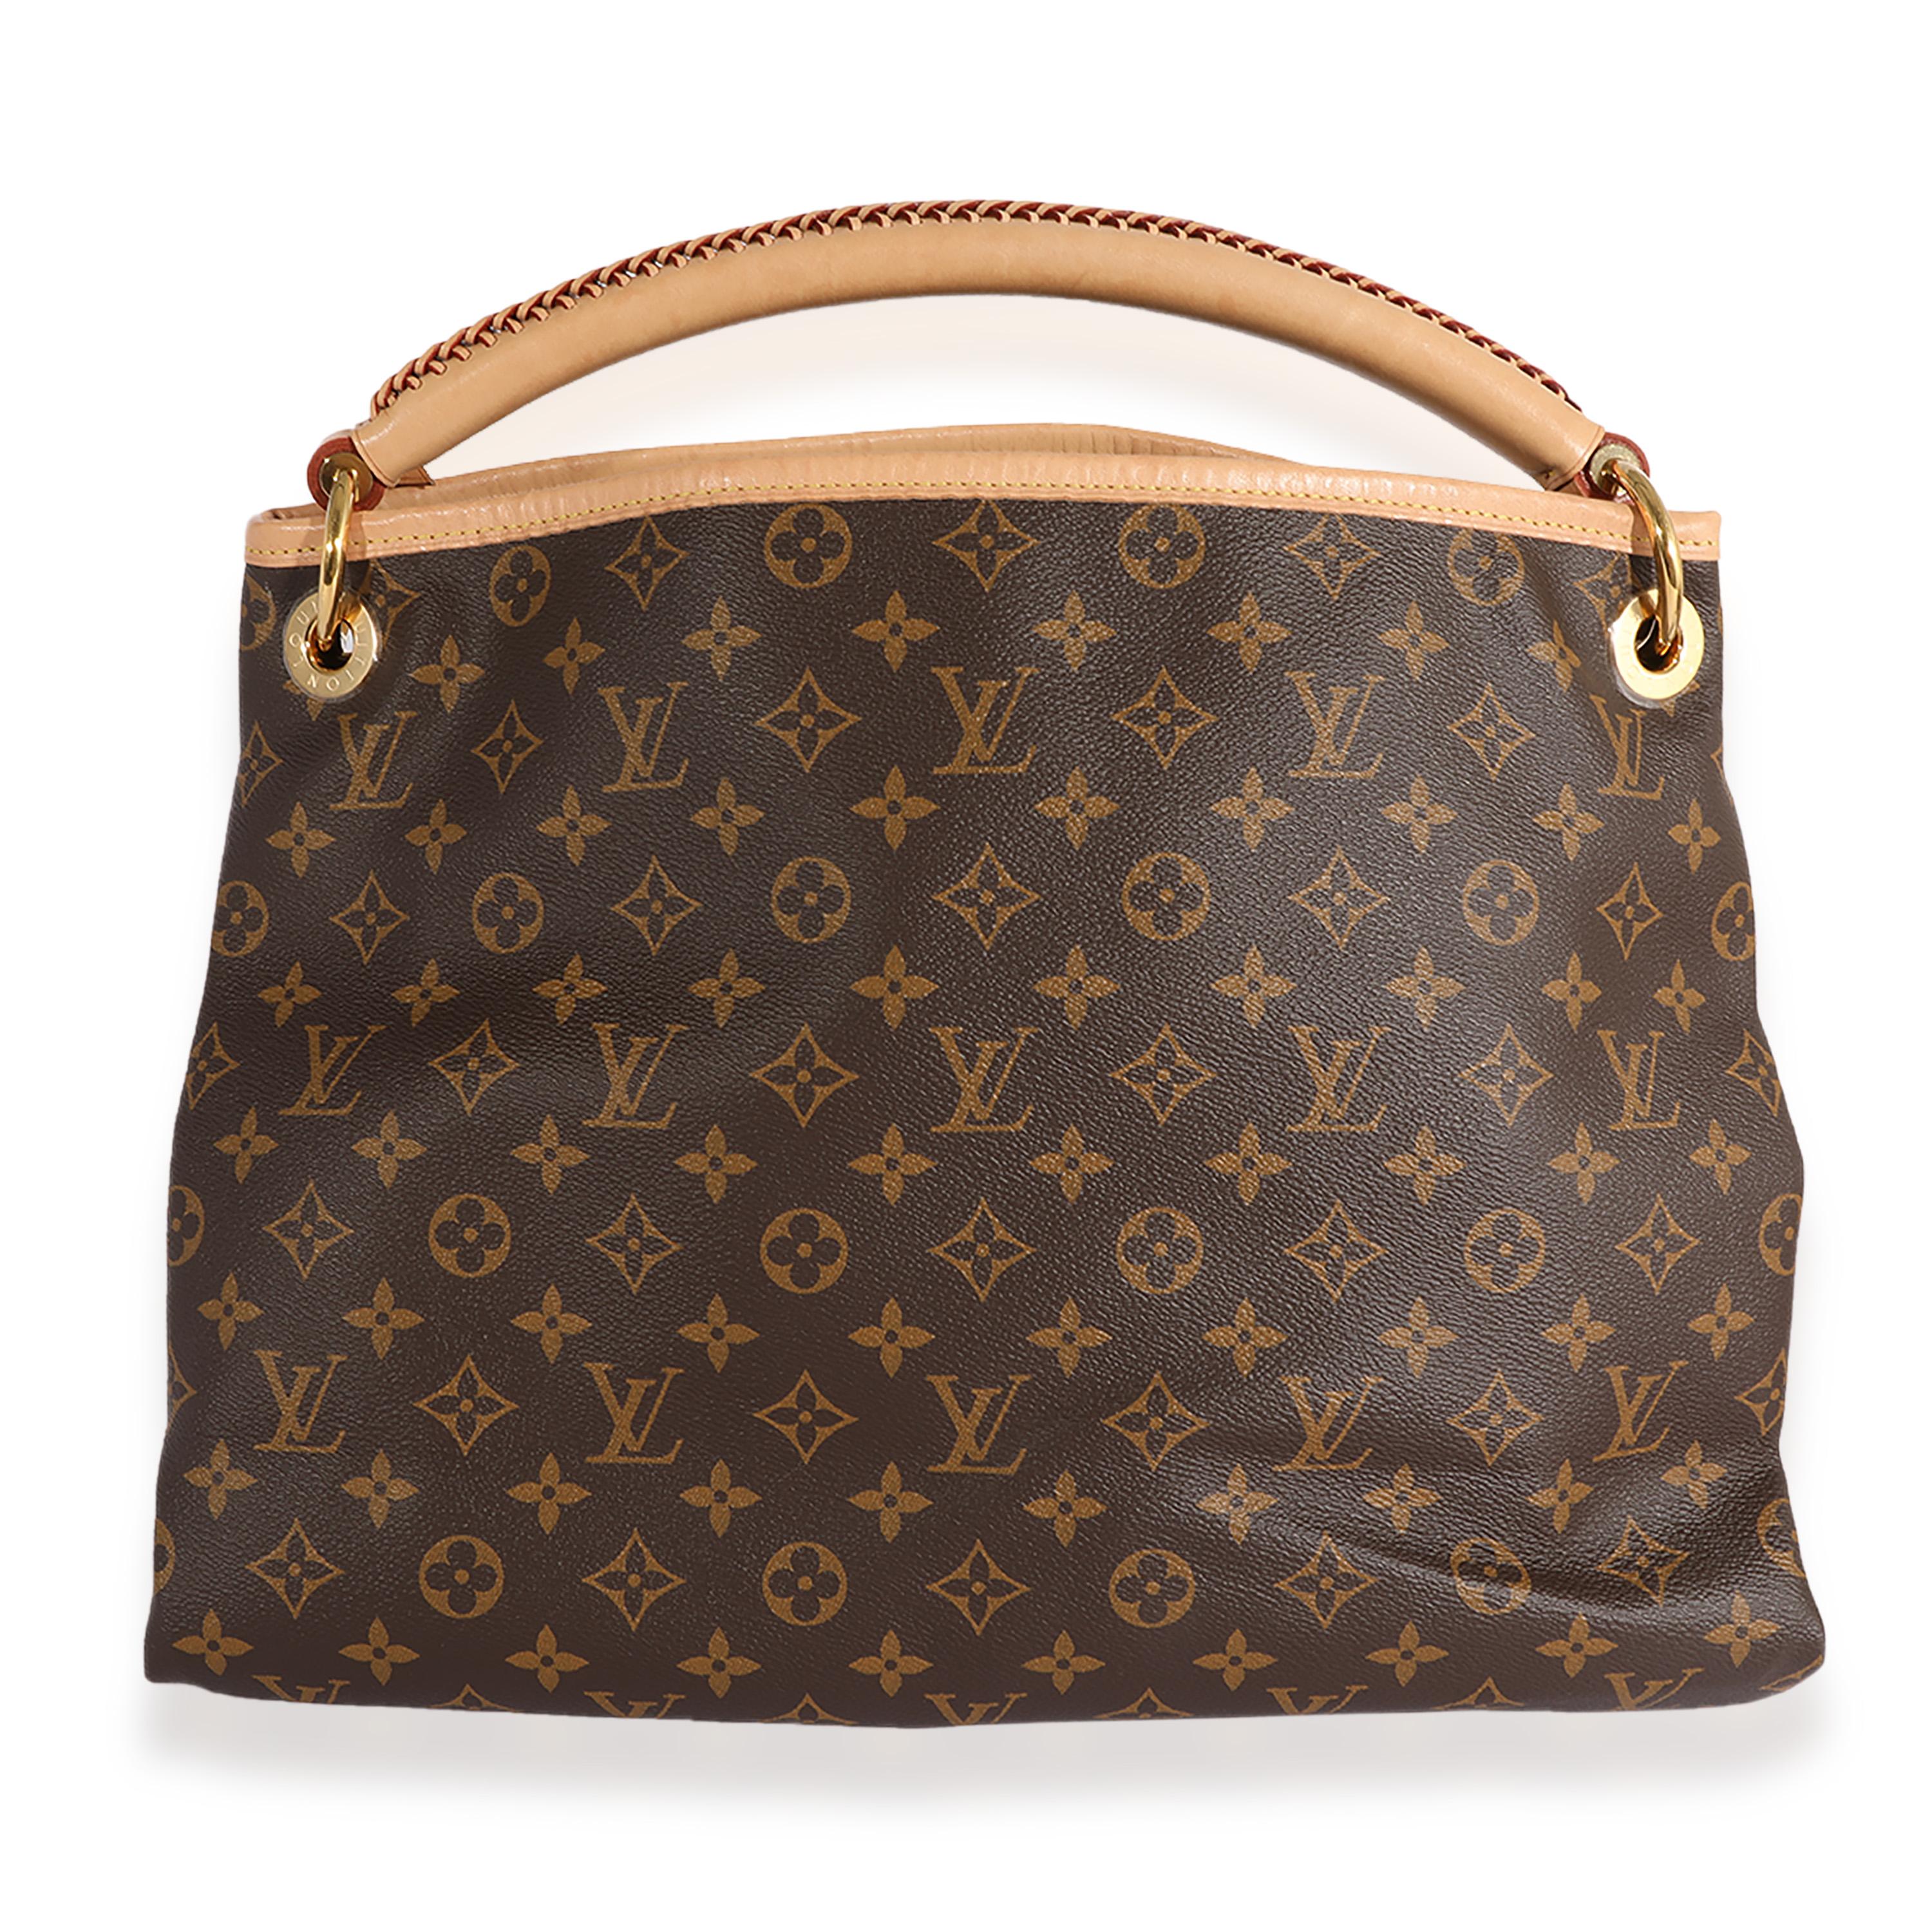 Listing Title: Louis Vuitton Monogram Canvas Artsy MM
SKU: 123705
MSRP: 2500.00
Condition: Pre-owned 
Handbag Condition: Very Good
Condition Comments: Very Good Condition. Plastic on some hardware. Light marks to leather trim. Scratching and